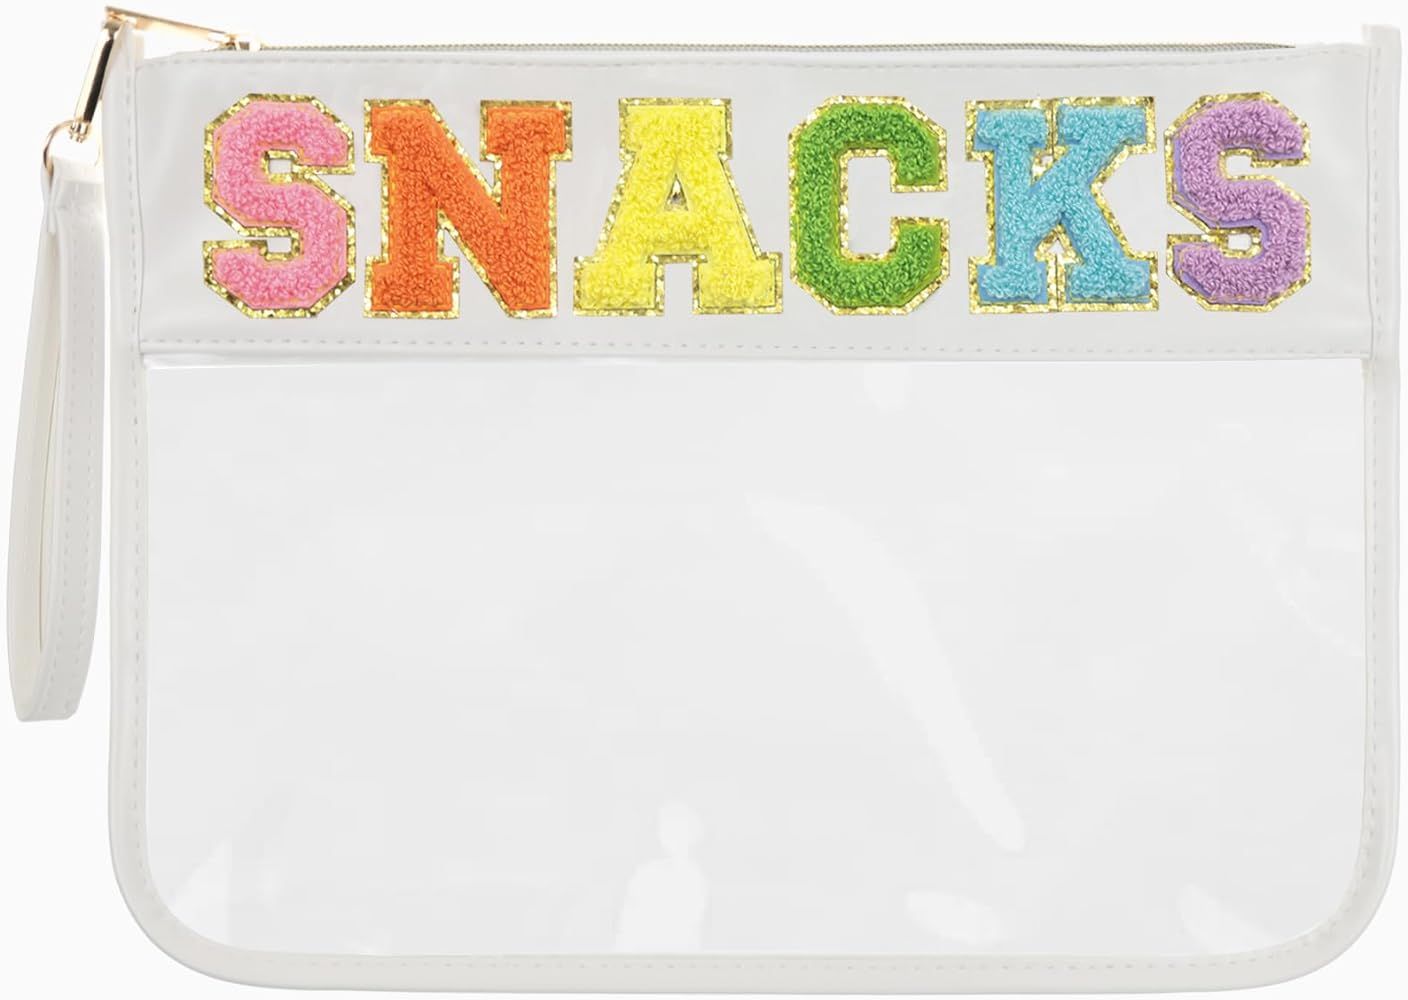 Burskit Snack Bag Clear Chenille Varsity Letter Zipper Pouch for Travel Nylon Clear Cosmetic Bag ... | Amazon (US)